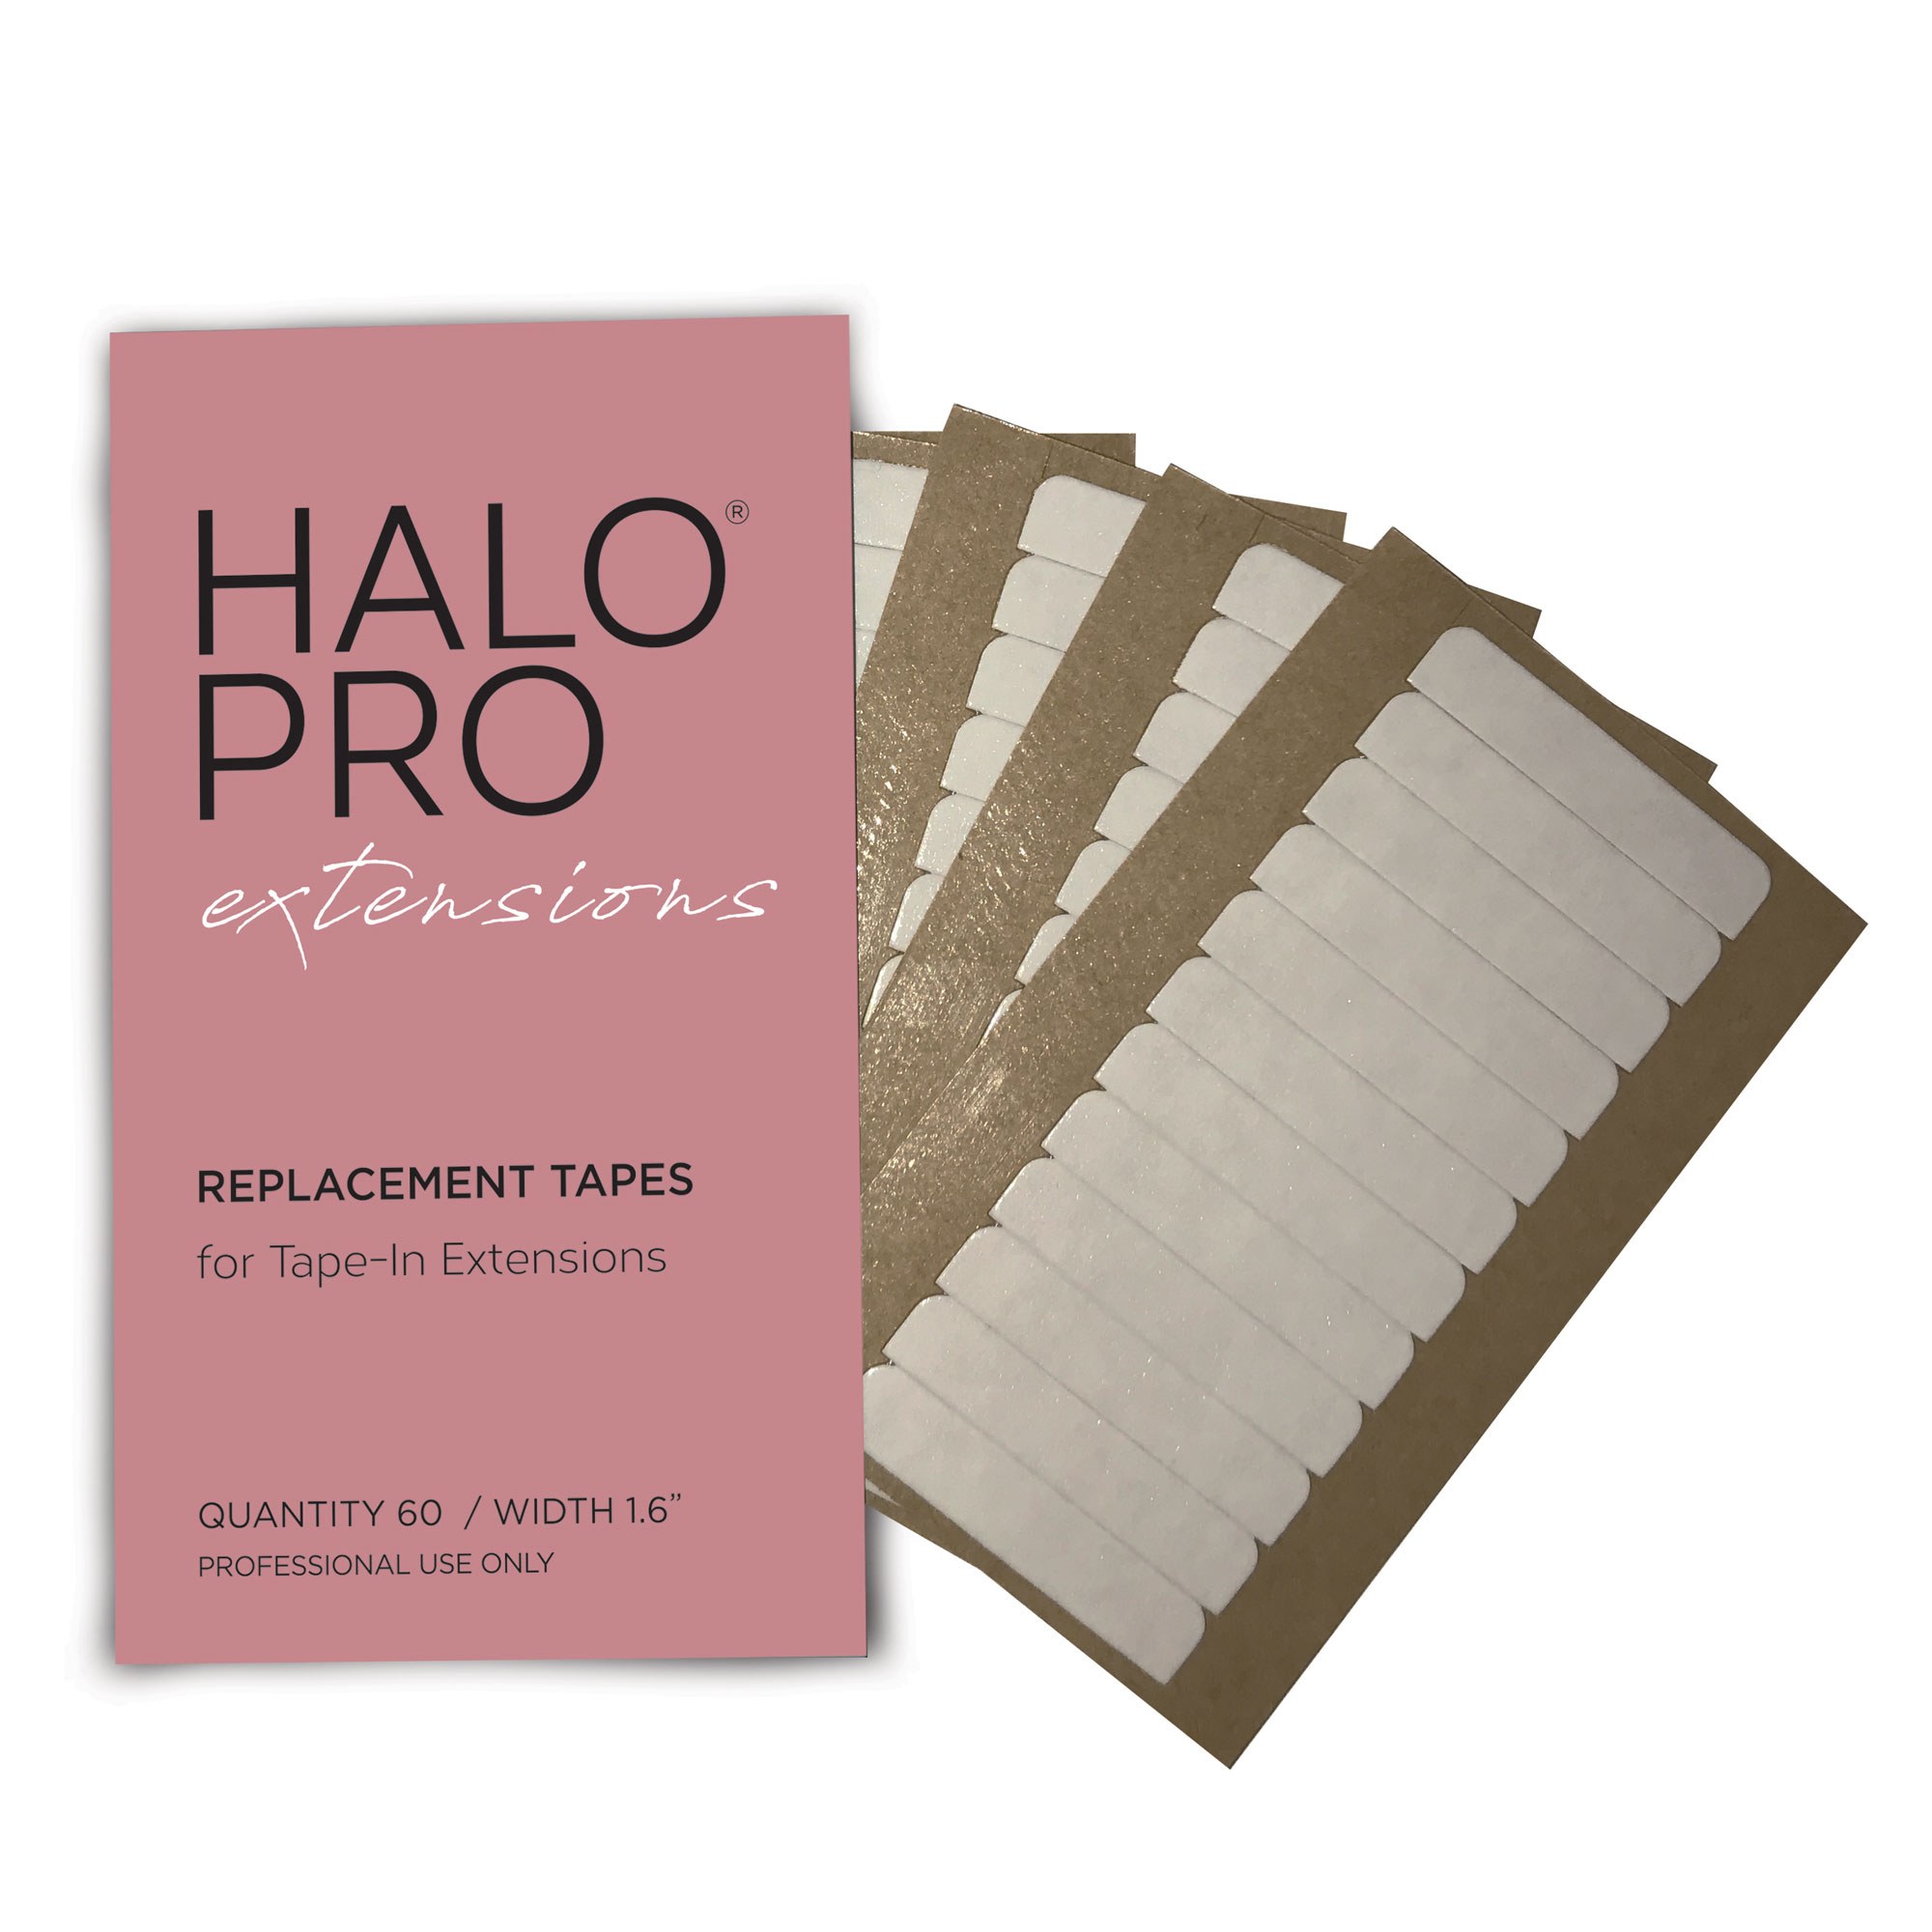 Halo Pro Replacement Tape Tabs, Single-Sided - 60 Count